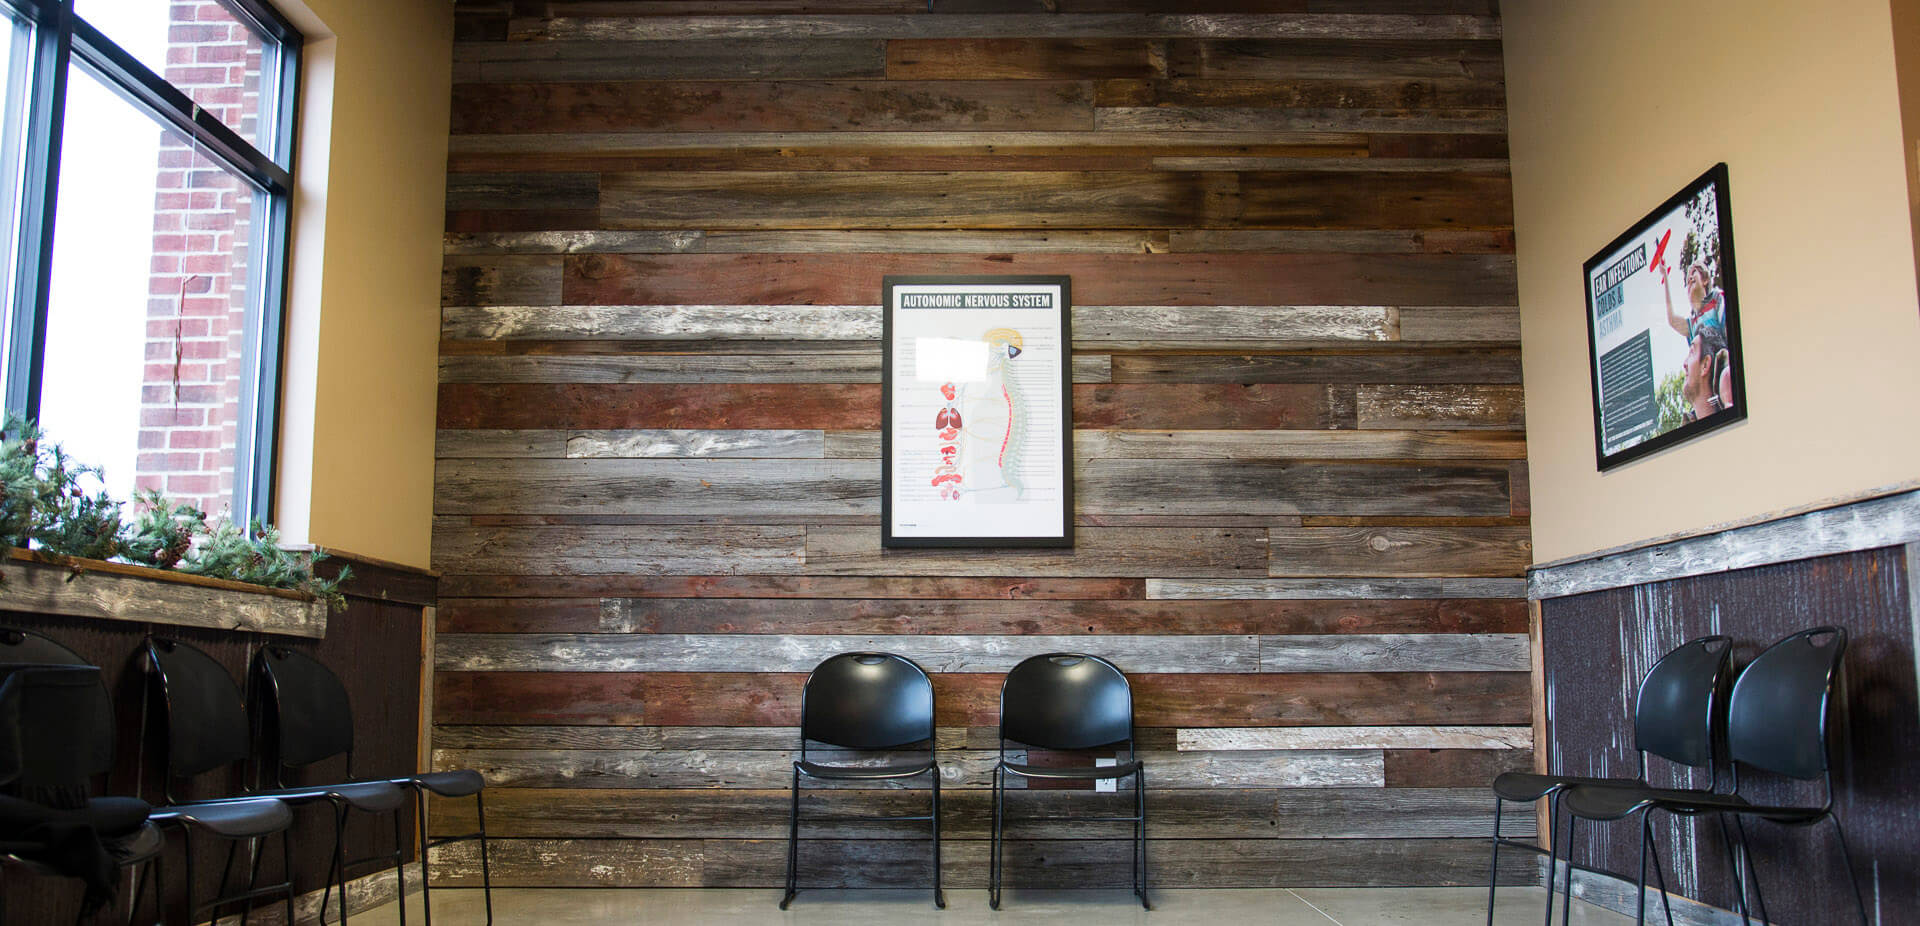 Two black chairs in front of a wooden wall.